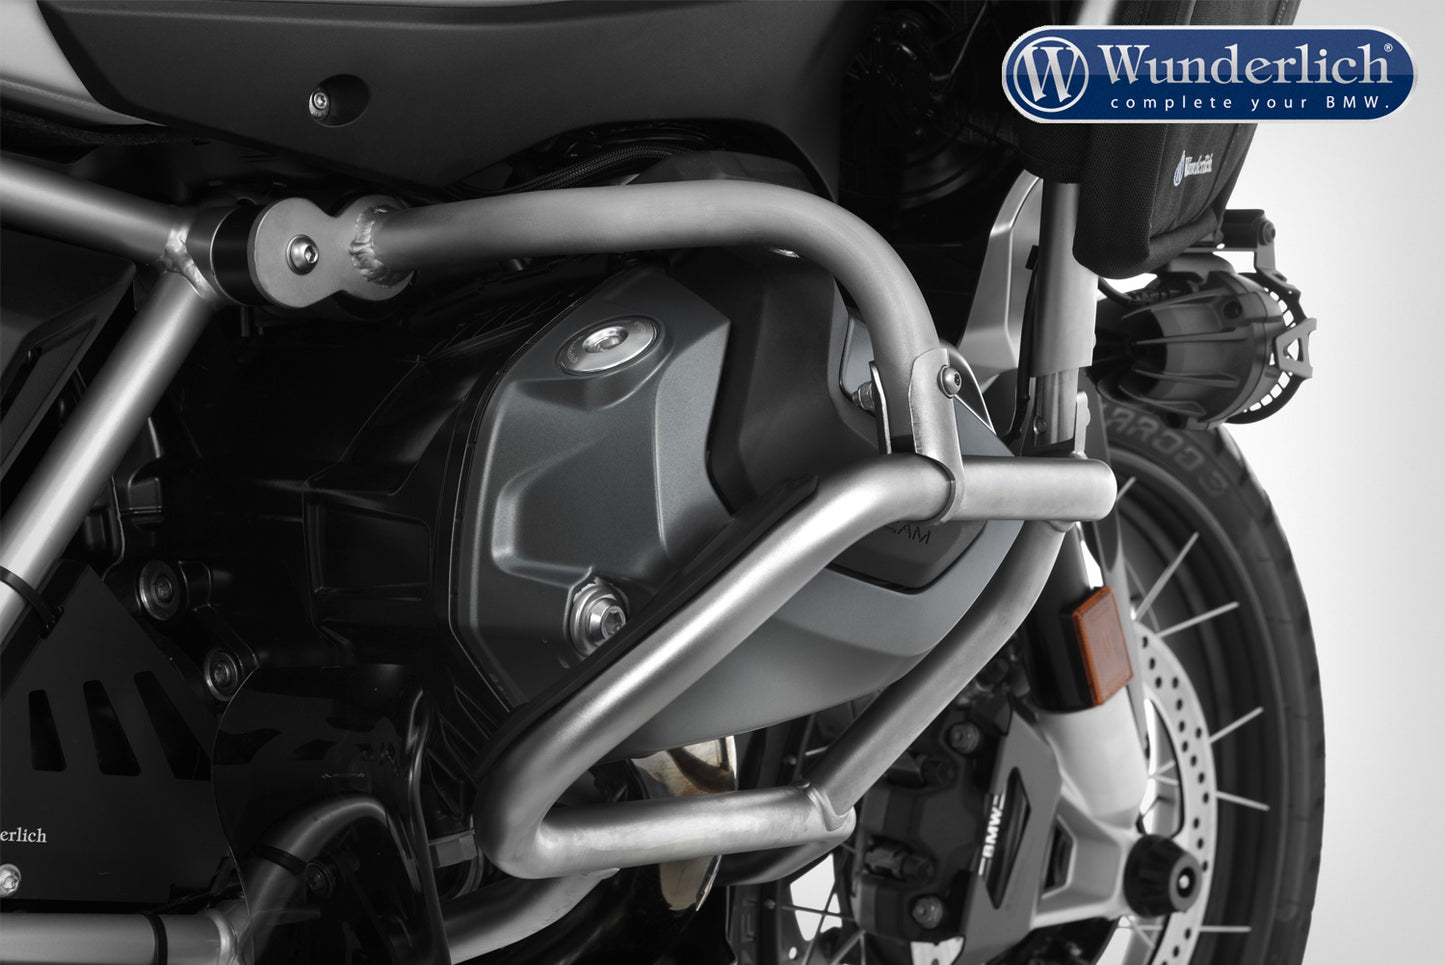 Wunderlich reinforcement bar for the original engine protection bar - stainless steel